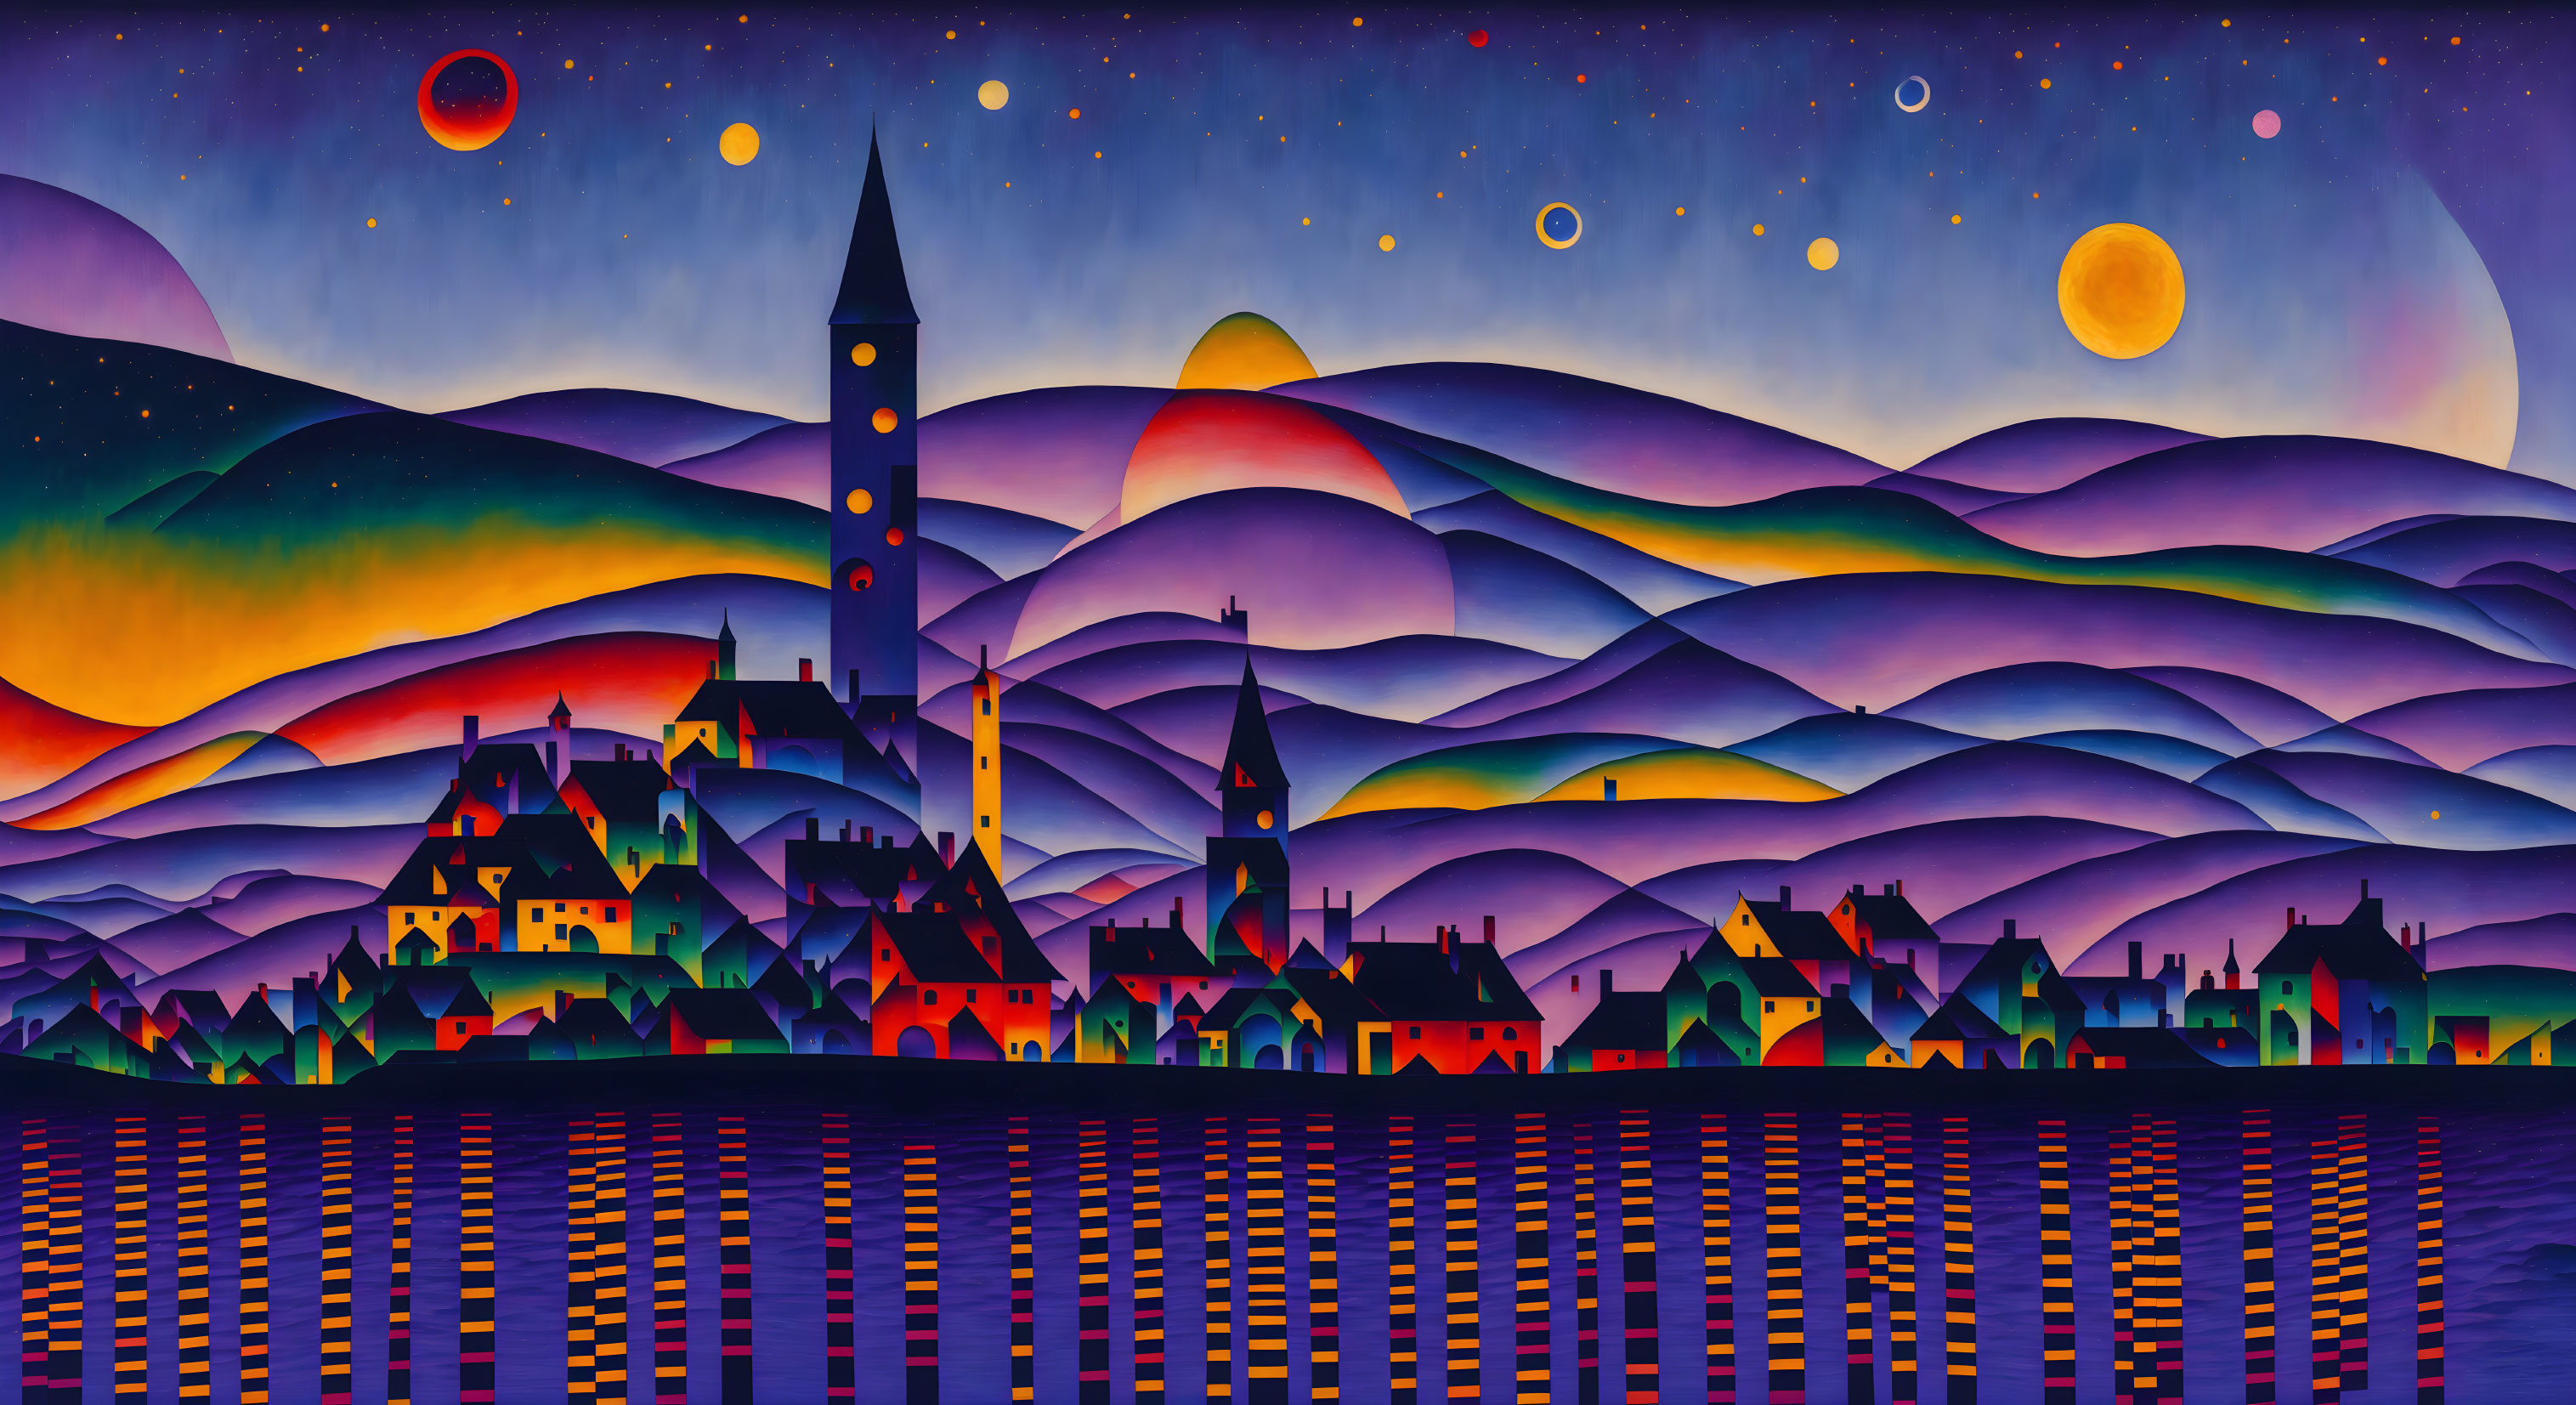 Colorful village painting with tower, hills, and multiple moons under starry sky.